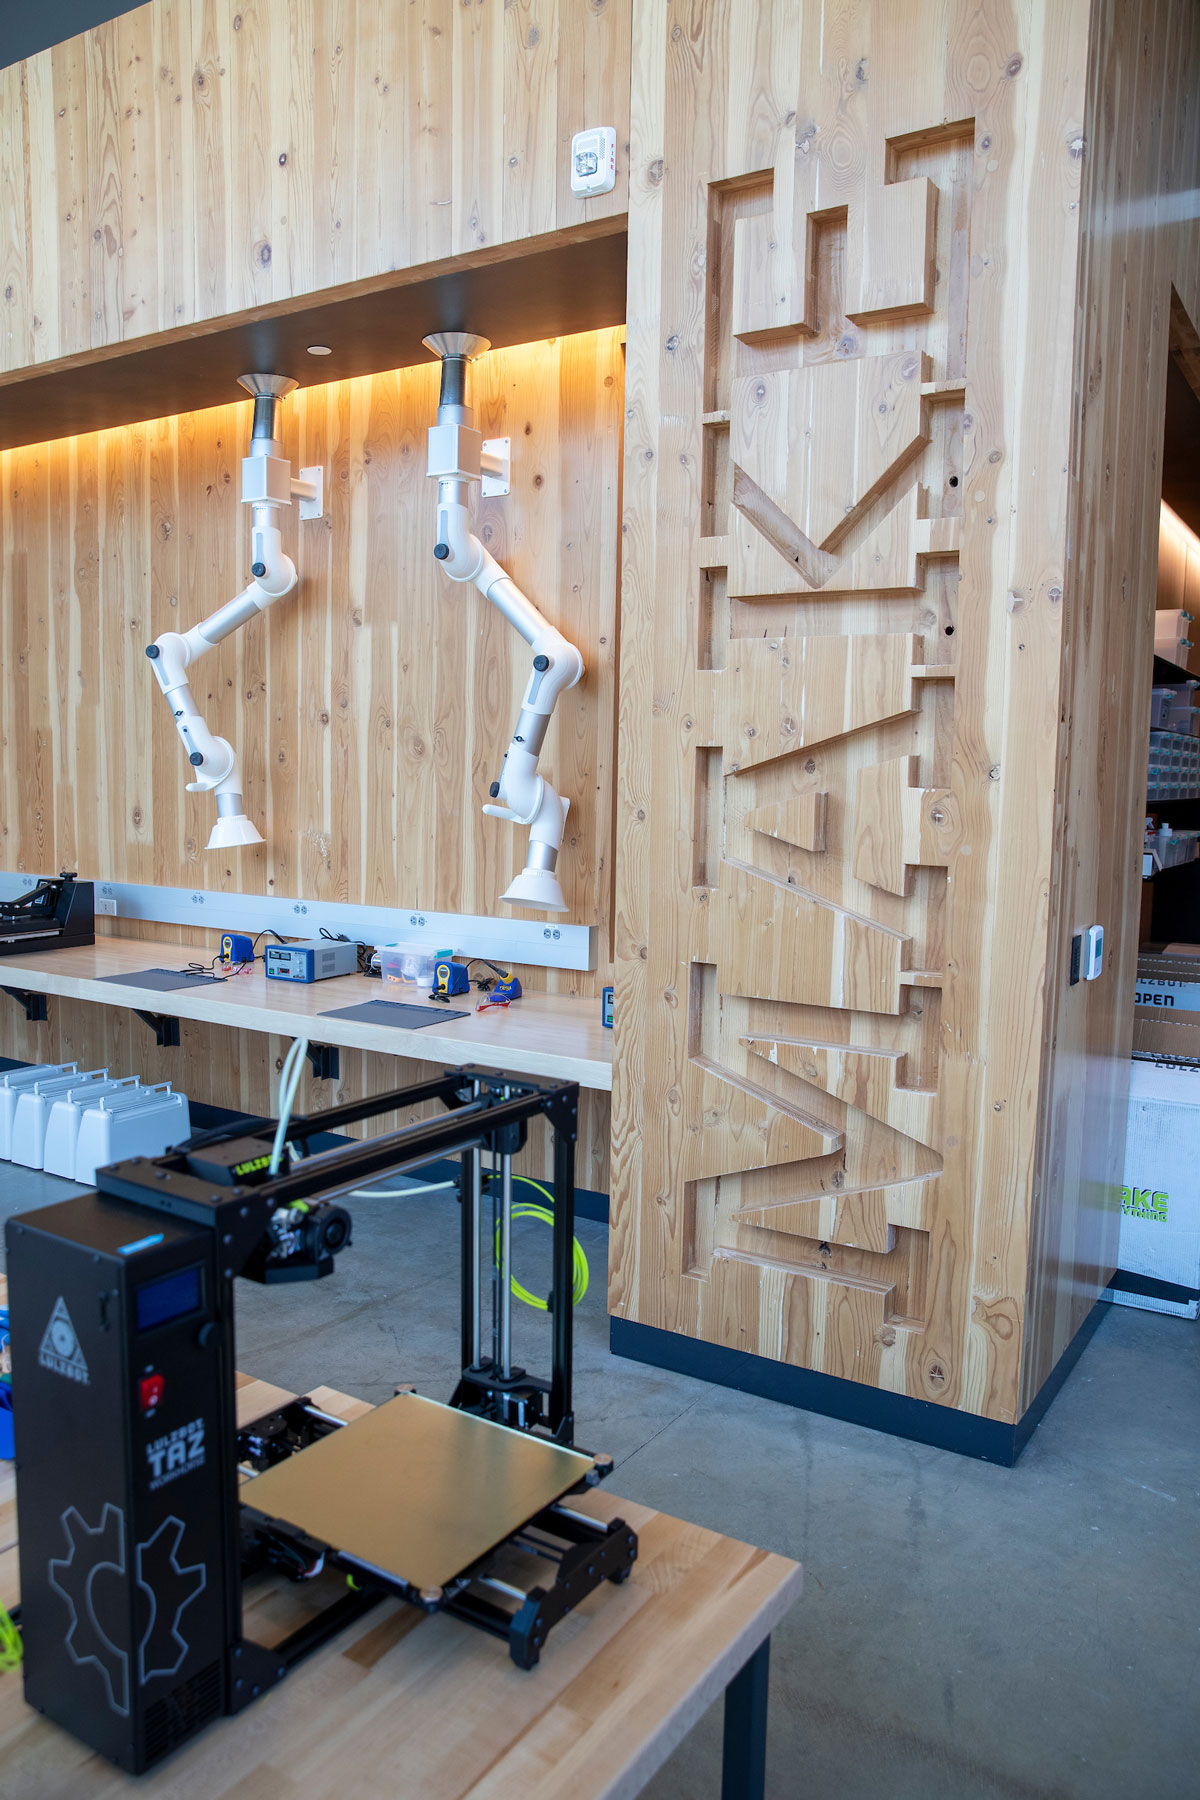 A look inside a section of the makerspace